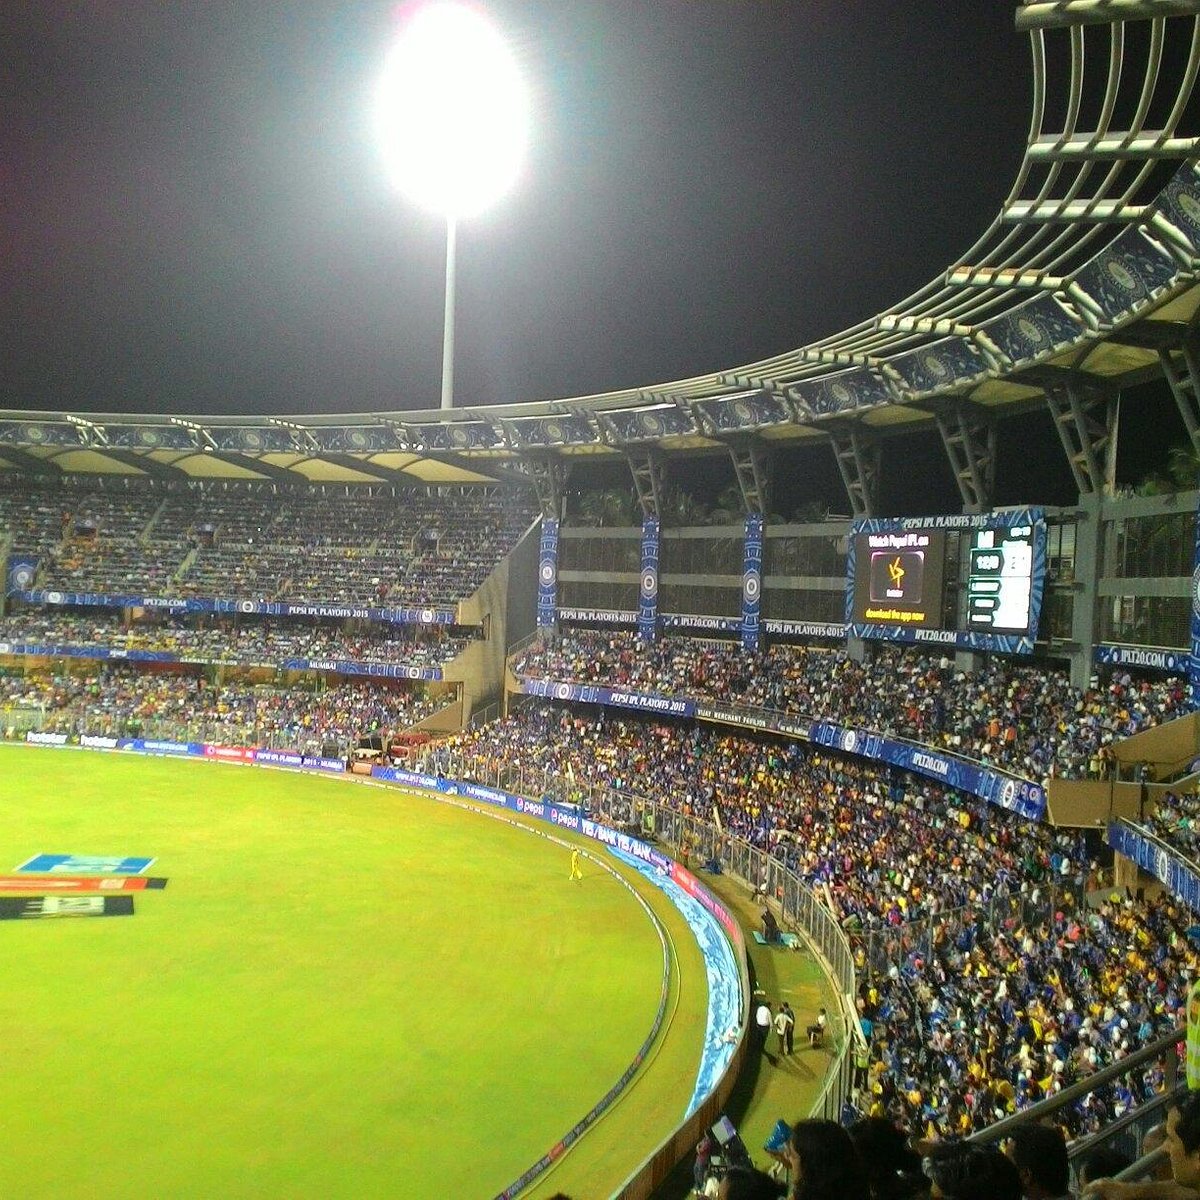 Wankhede Stadium, a famous cricket venue near sea view hotels in Mumbai, hosting thrilling matches and adding excitement to your stay